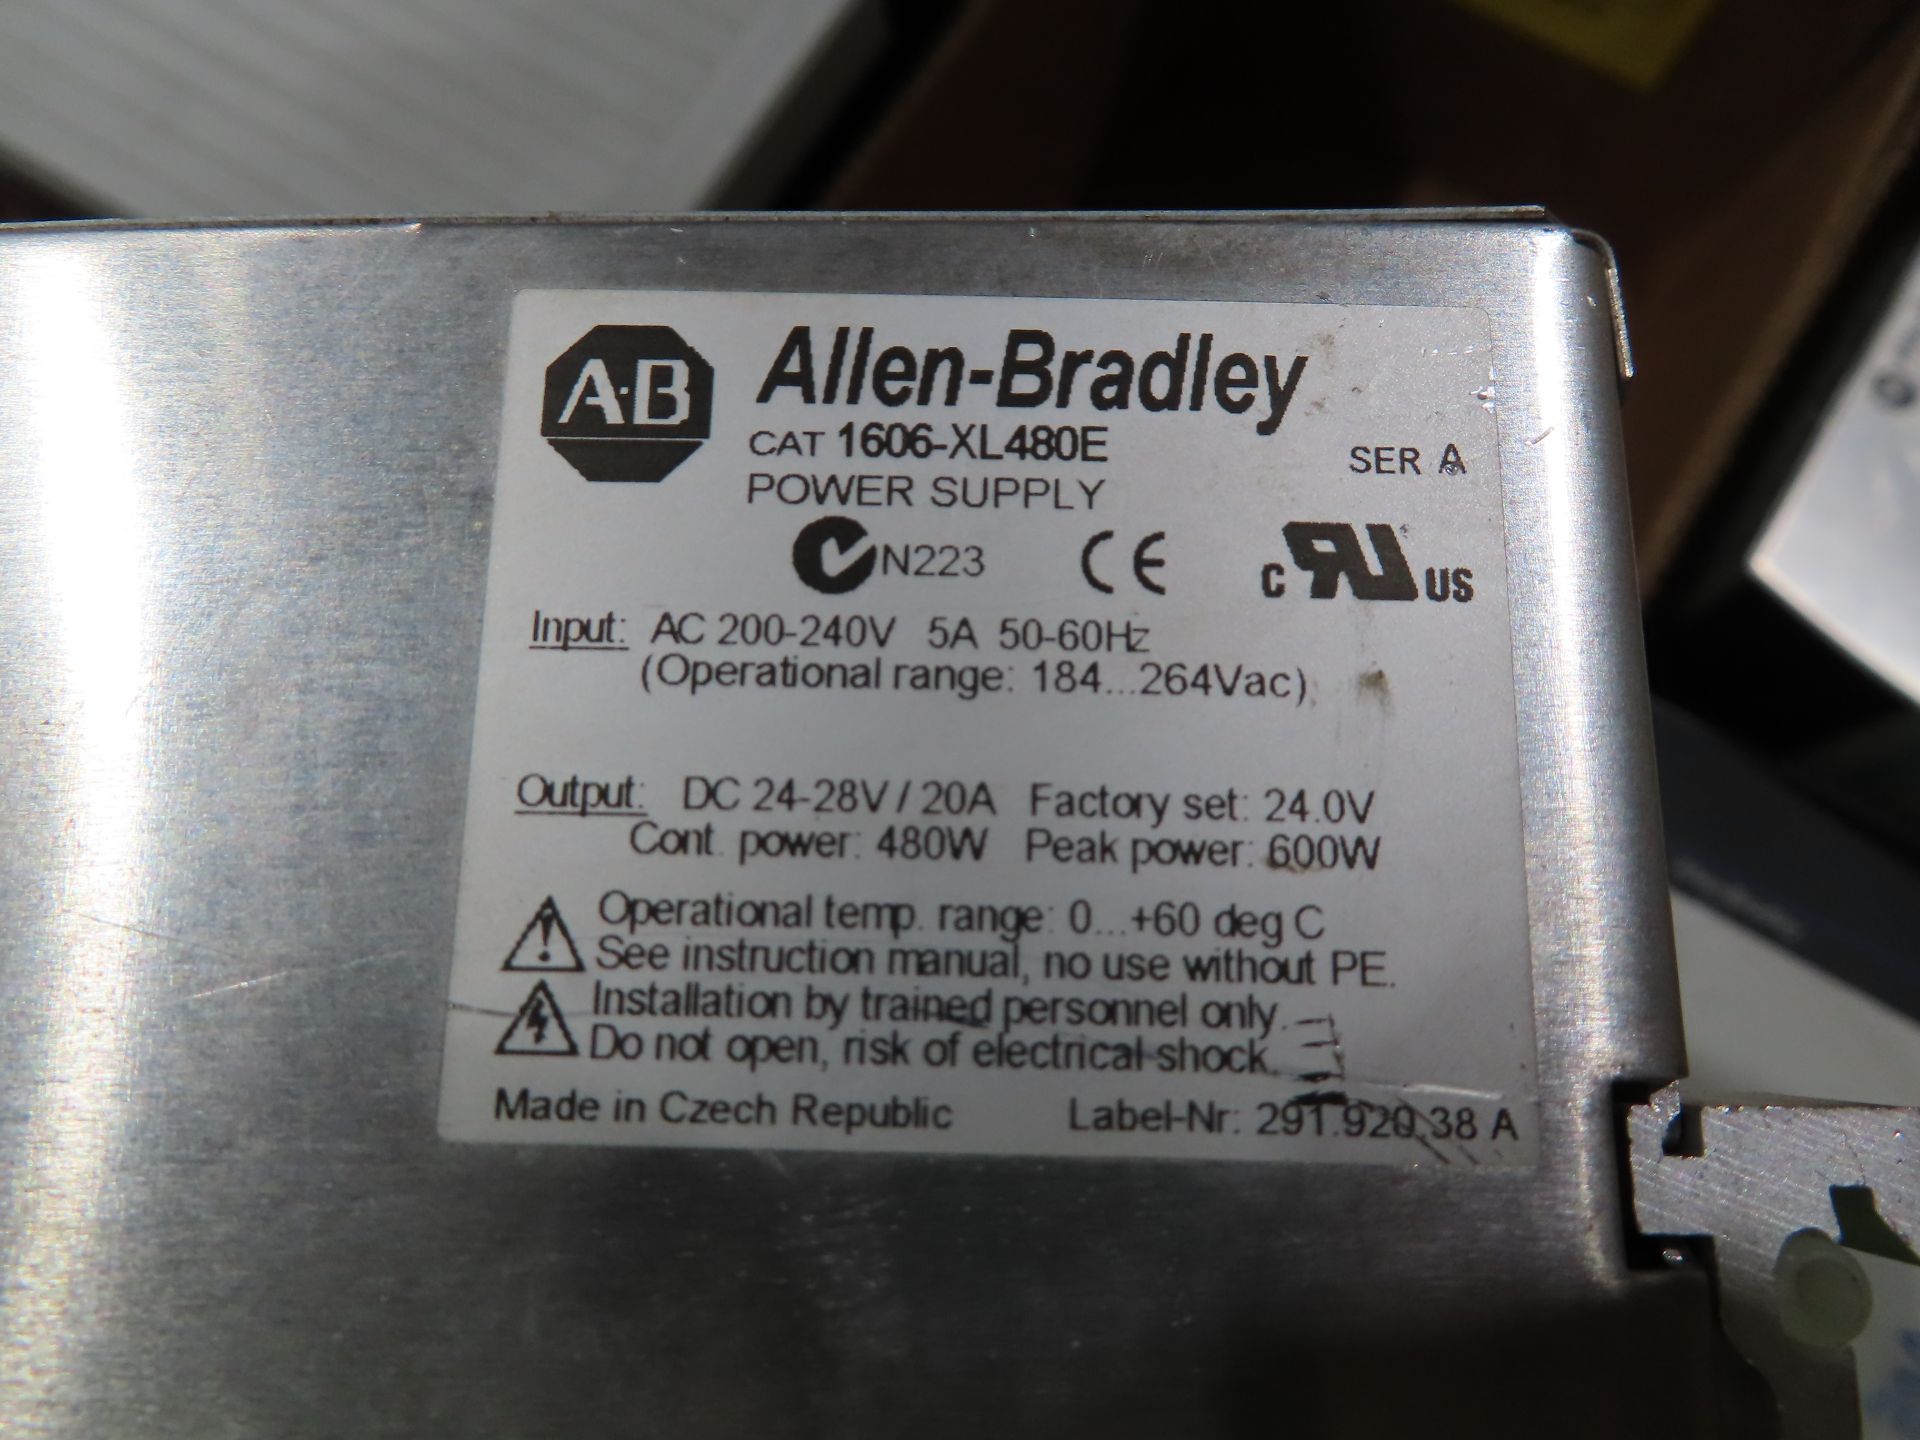 Allen Bradley catalog 1606-XL480E power supply, as always, with Brolyn LLC auctions, all lots can be - Image 2 of 2